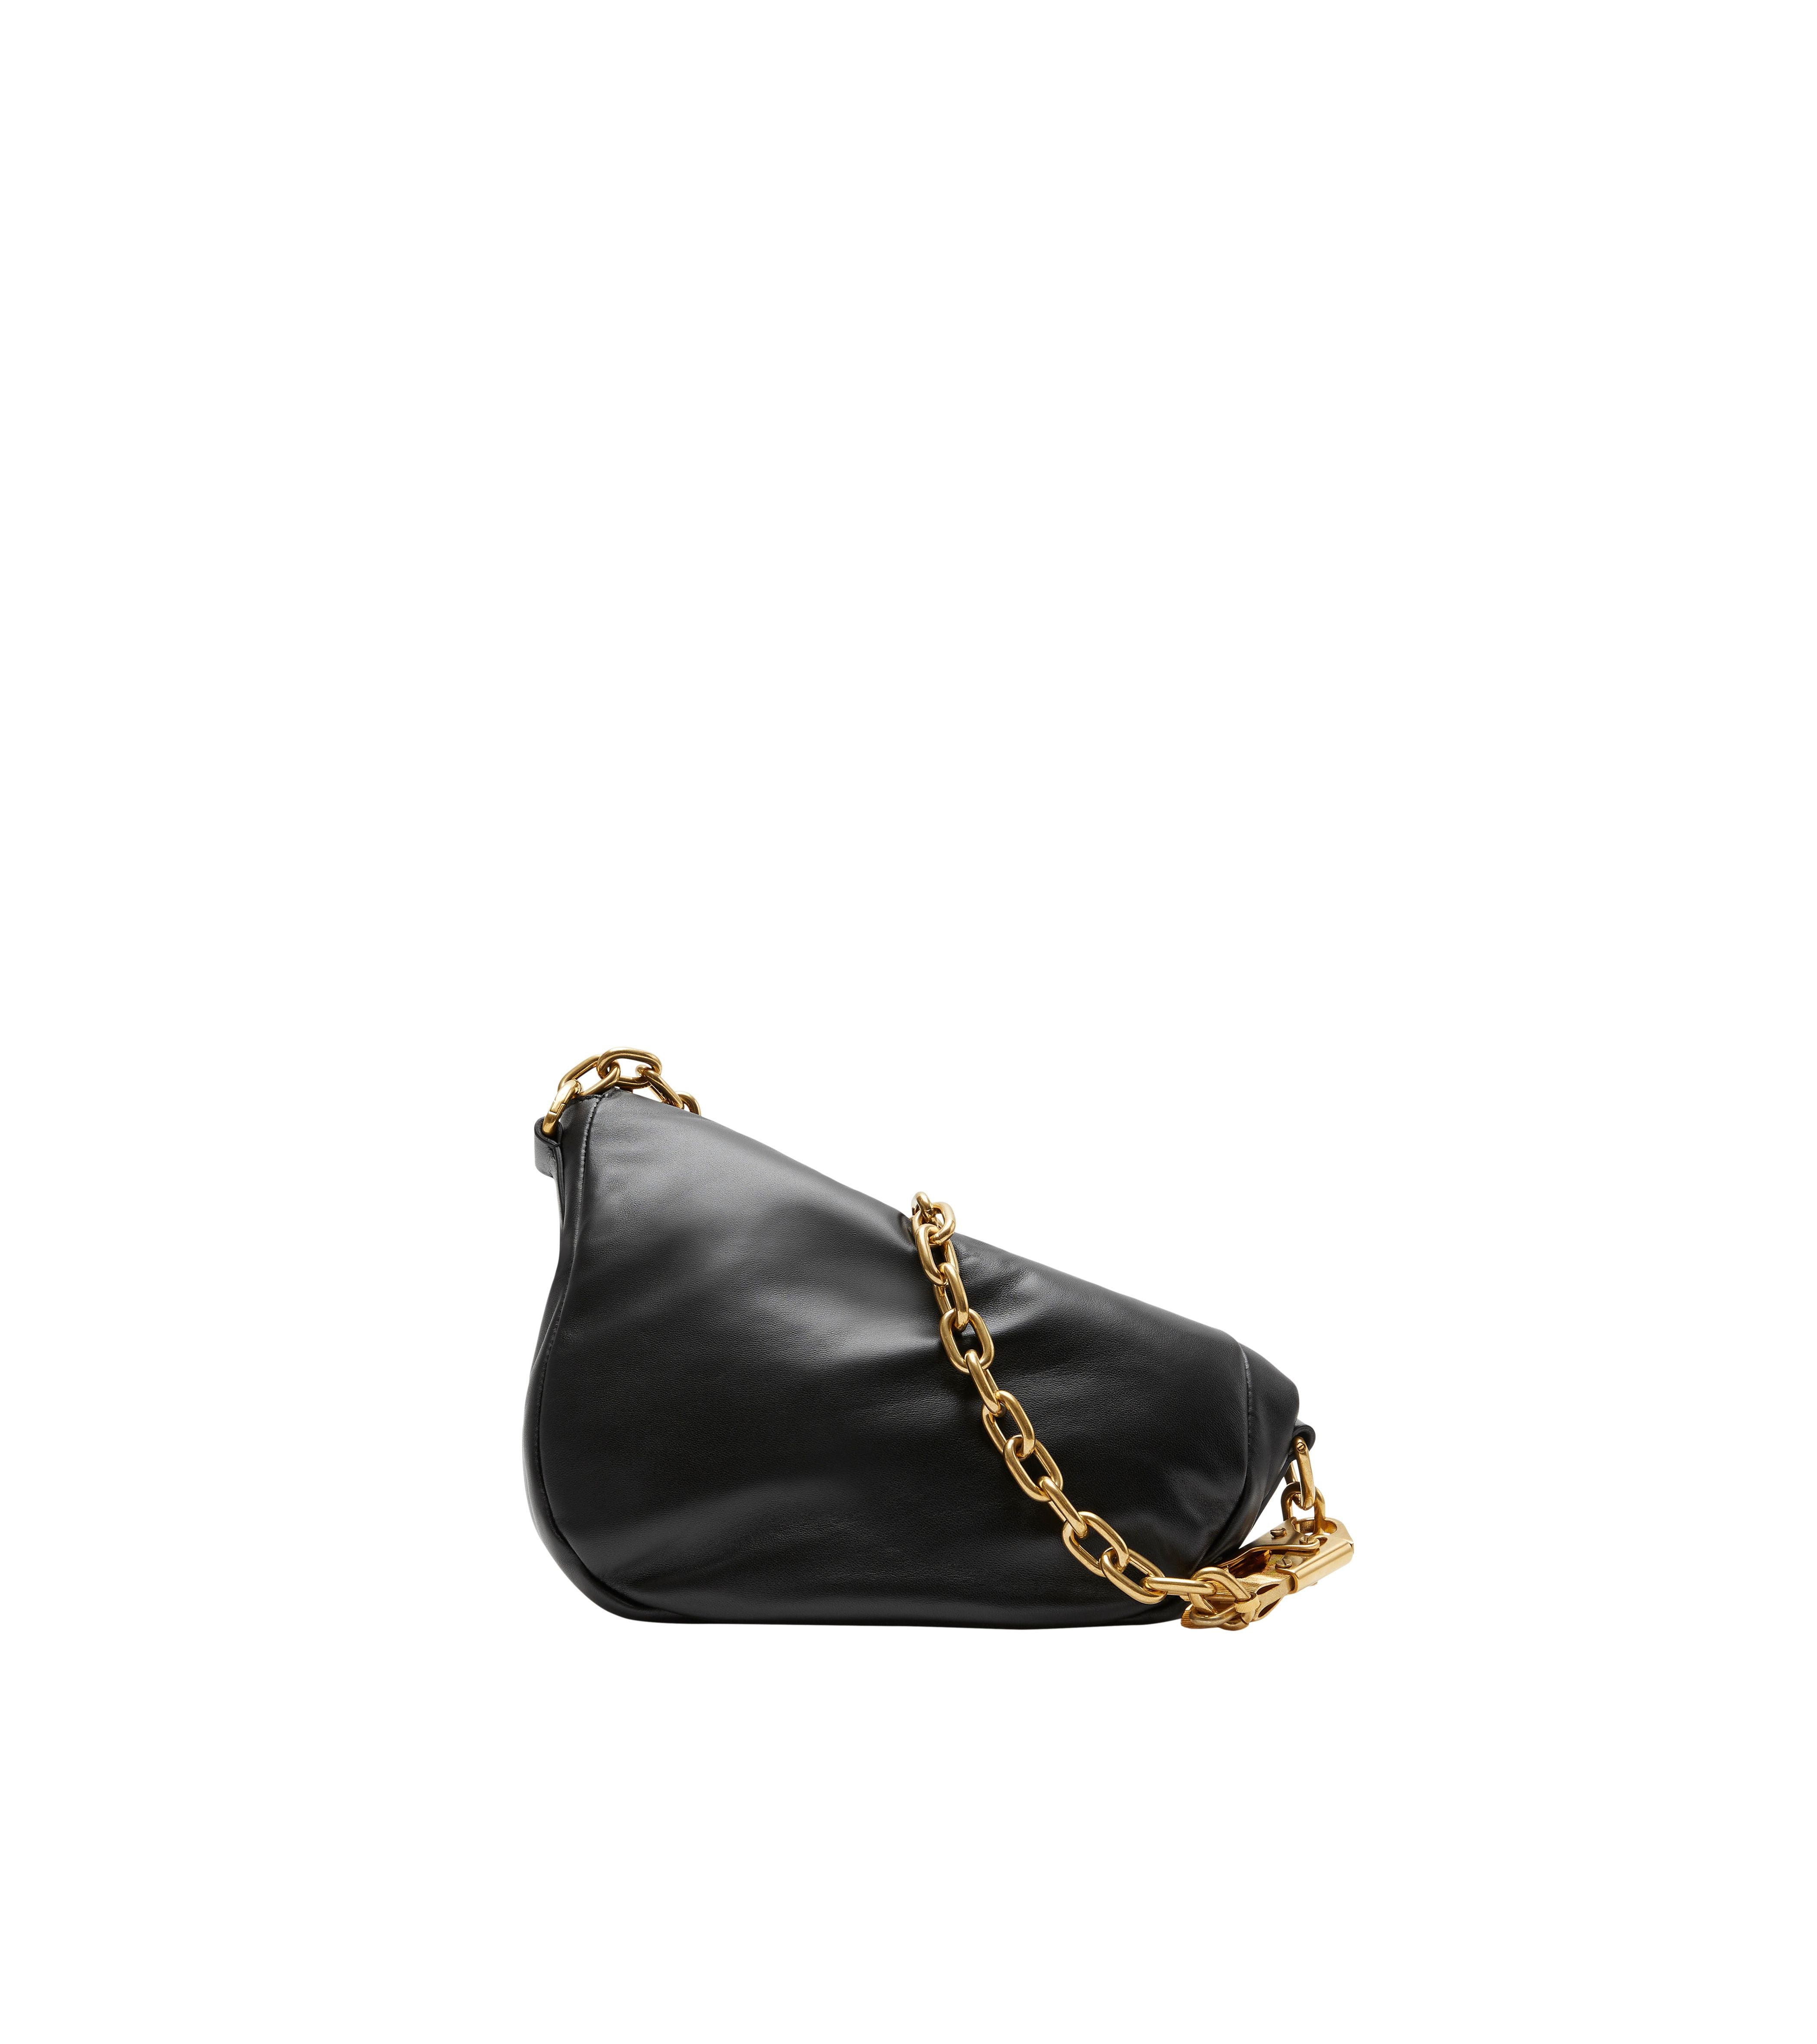 BURBERRY | SMALL KNIGHT BAG